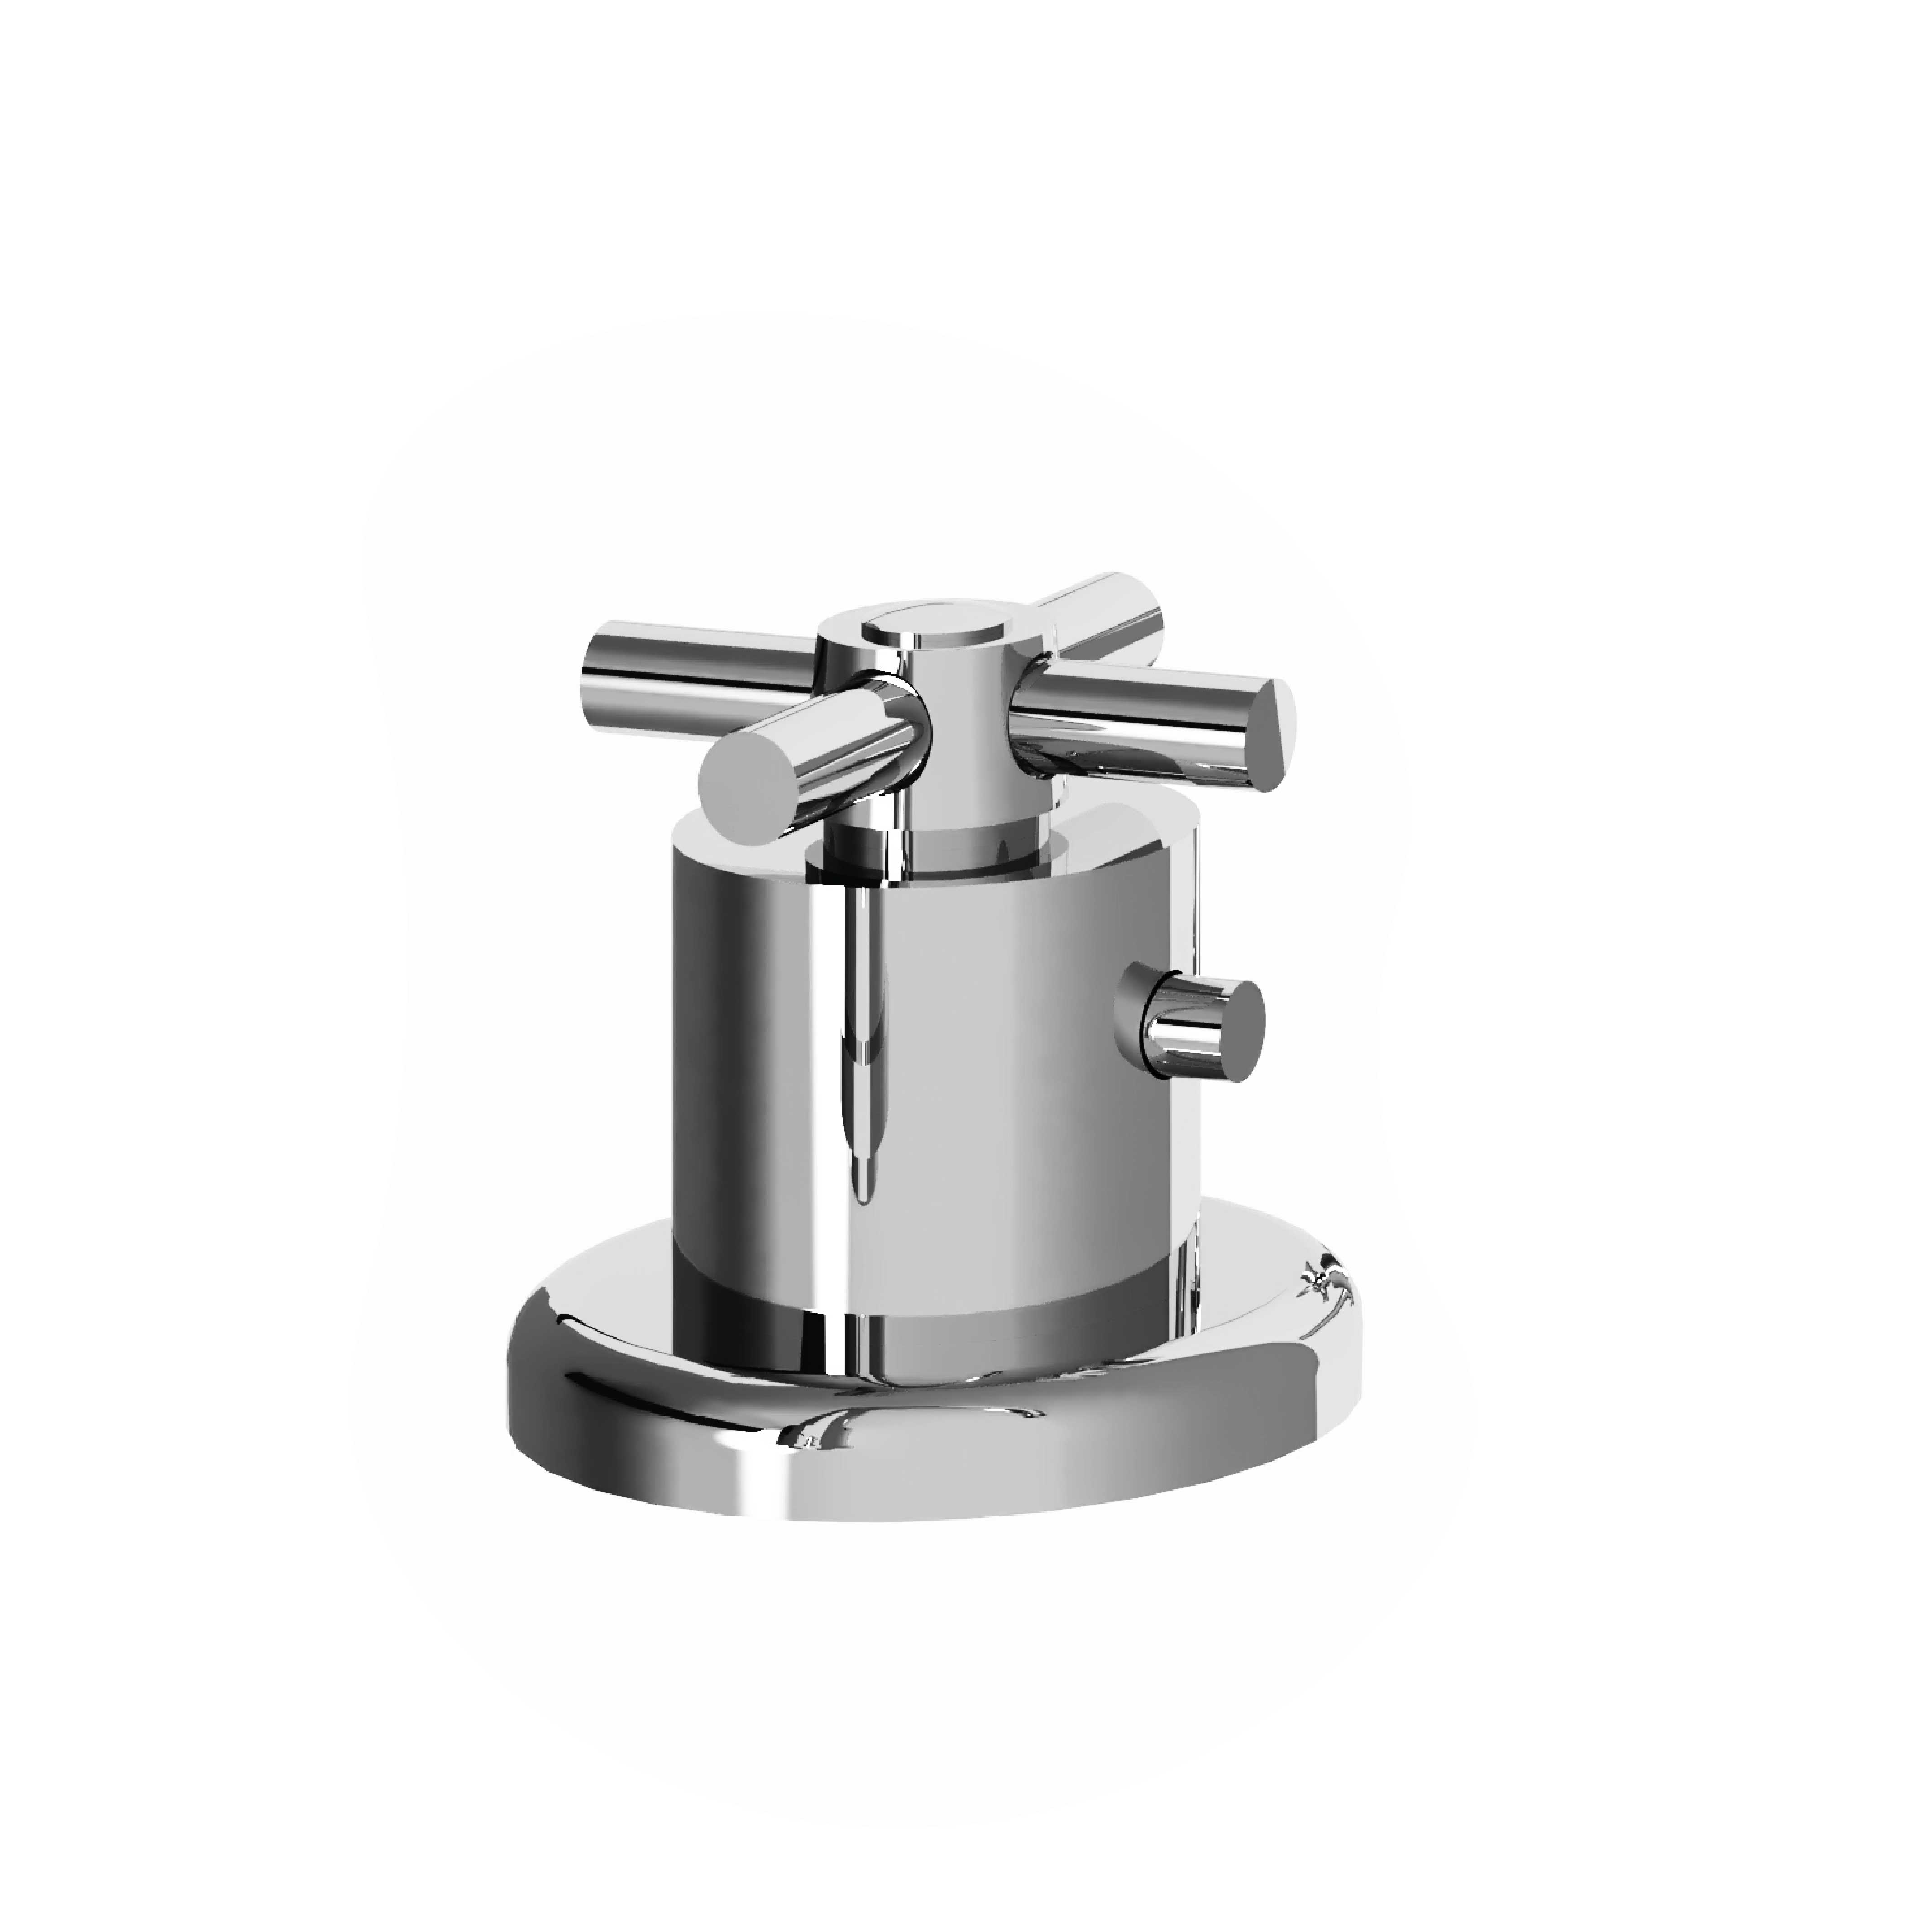 M90-330T Rim mounted thermo. mixer